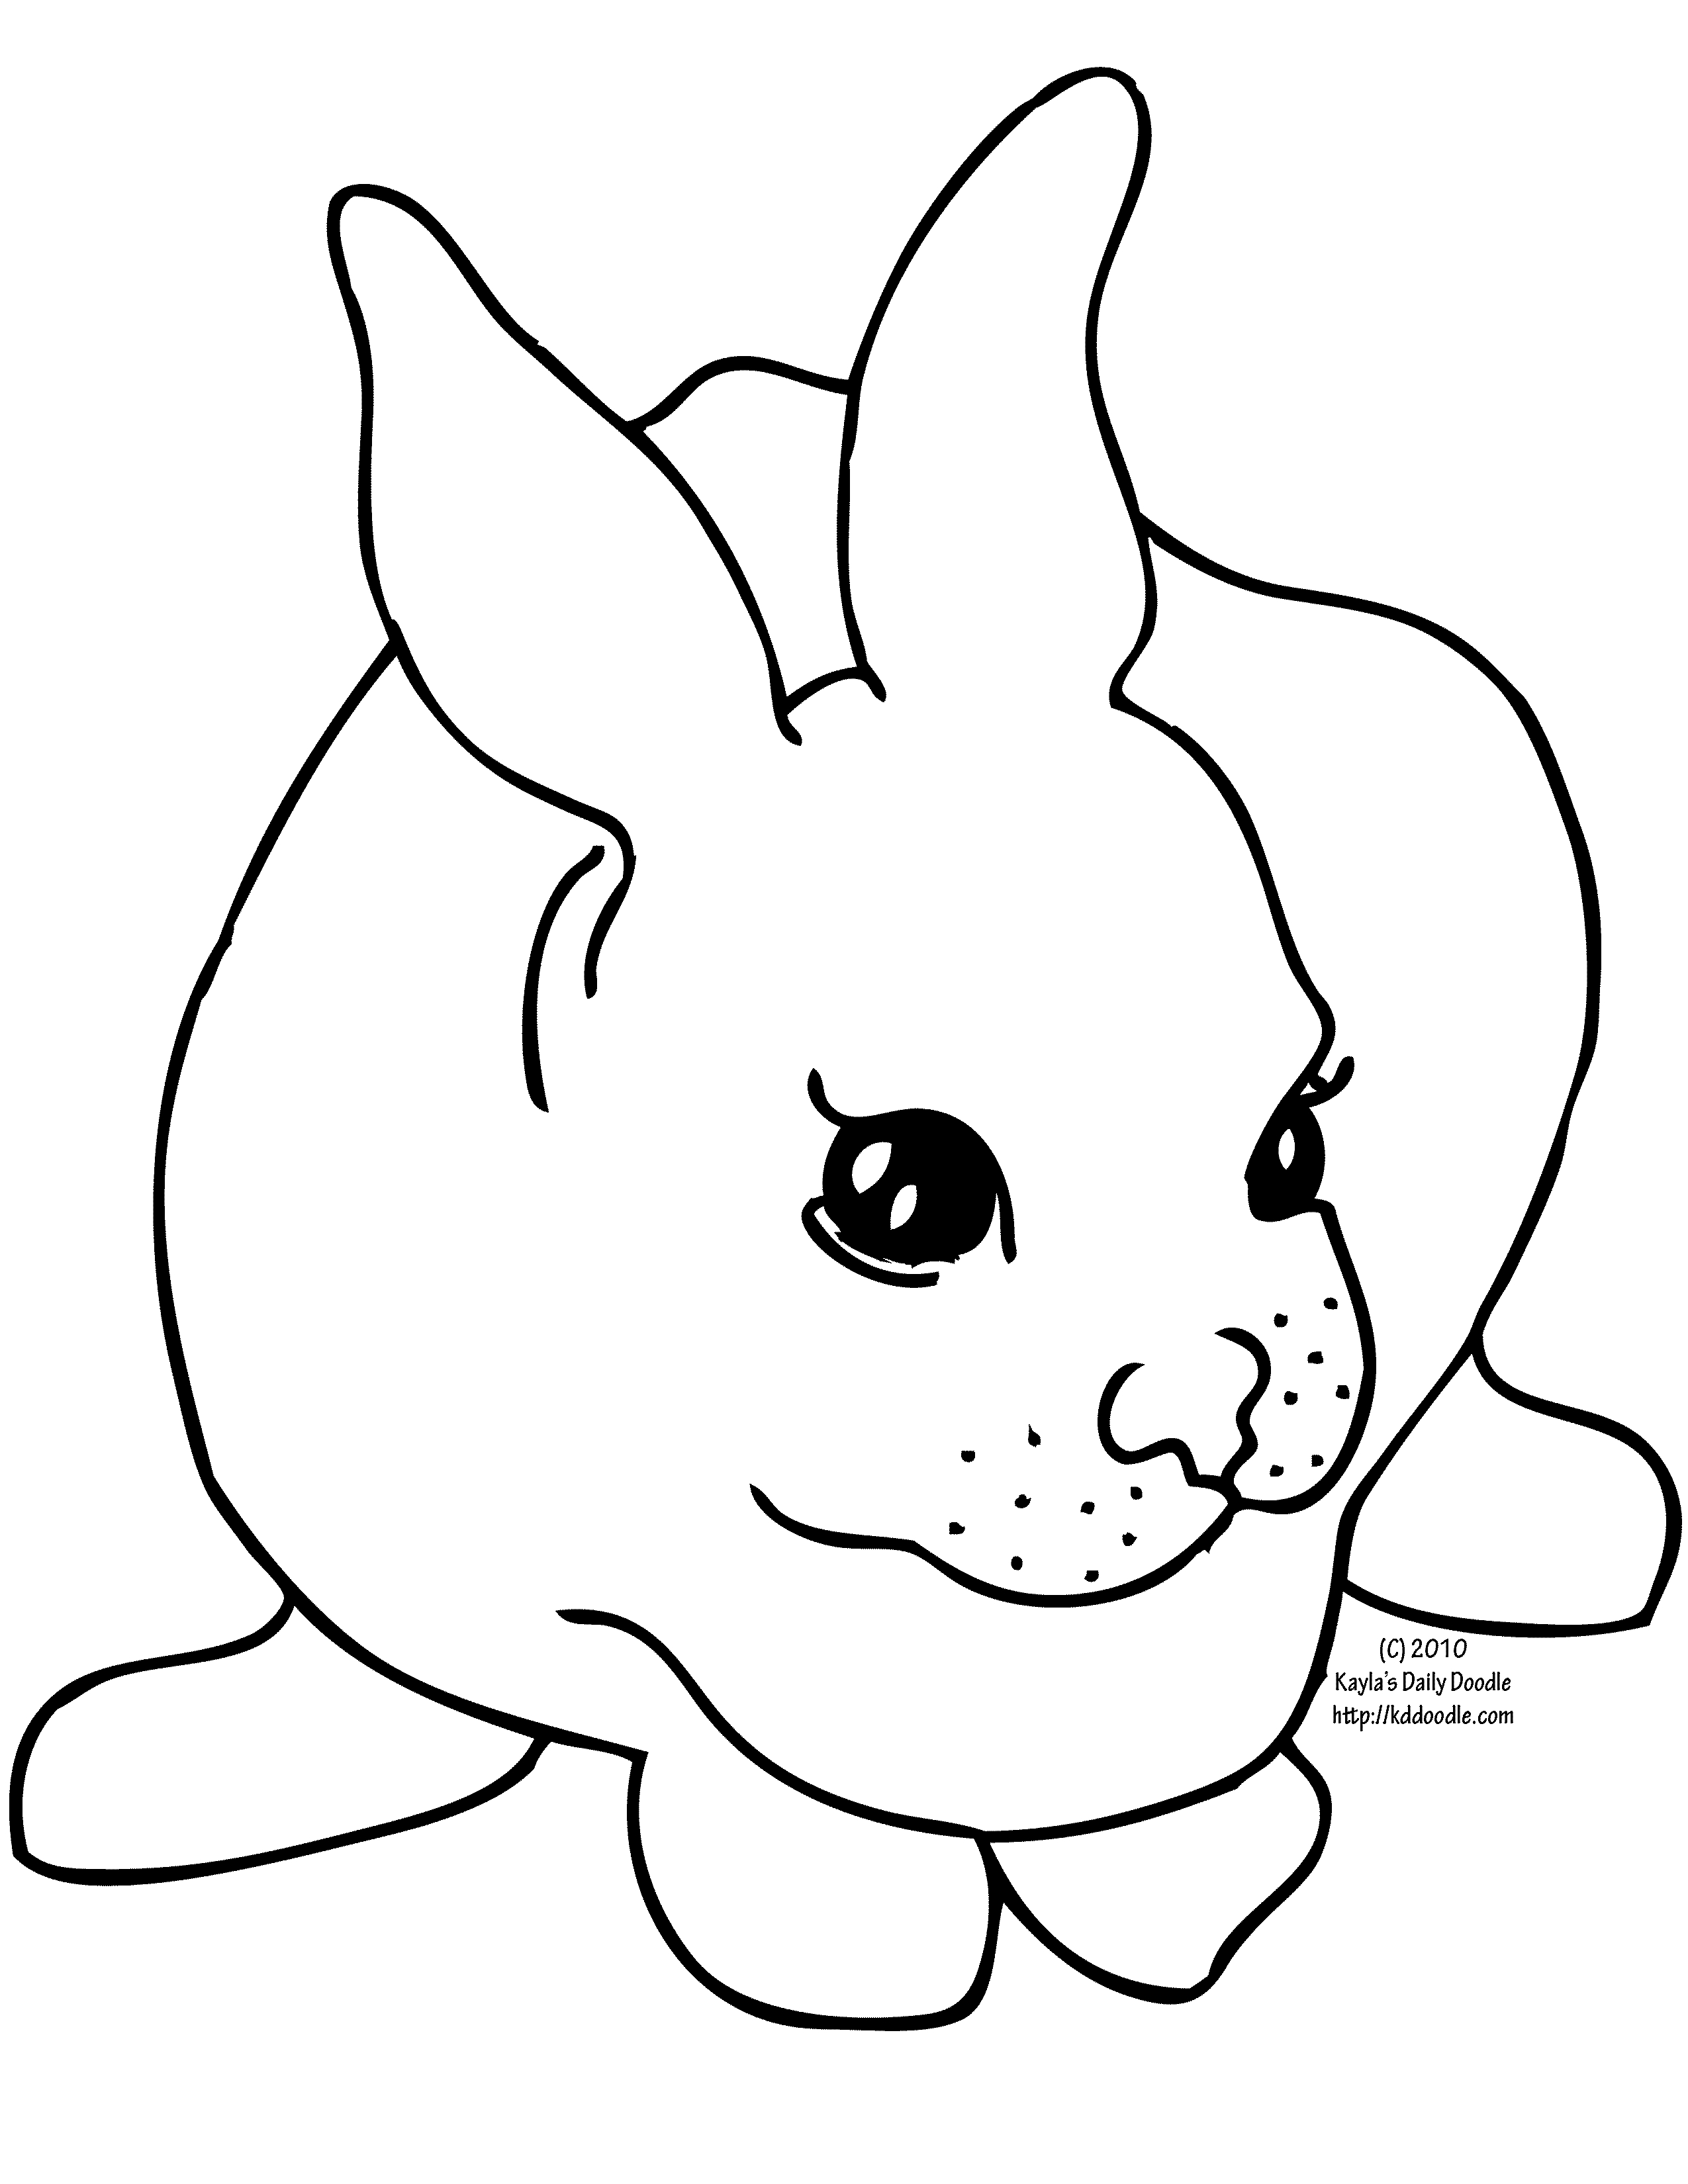 Free Printable Peter Rabbit Coloring Pages Free Printable Coloring Pages Rabbits